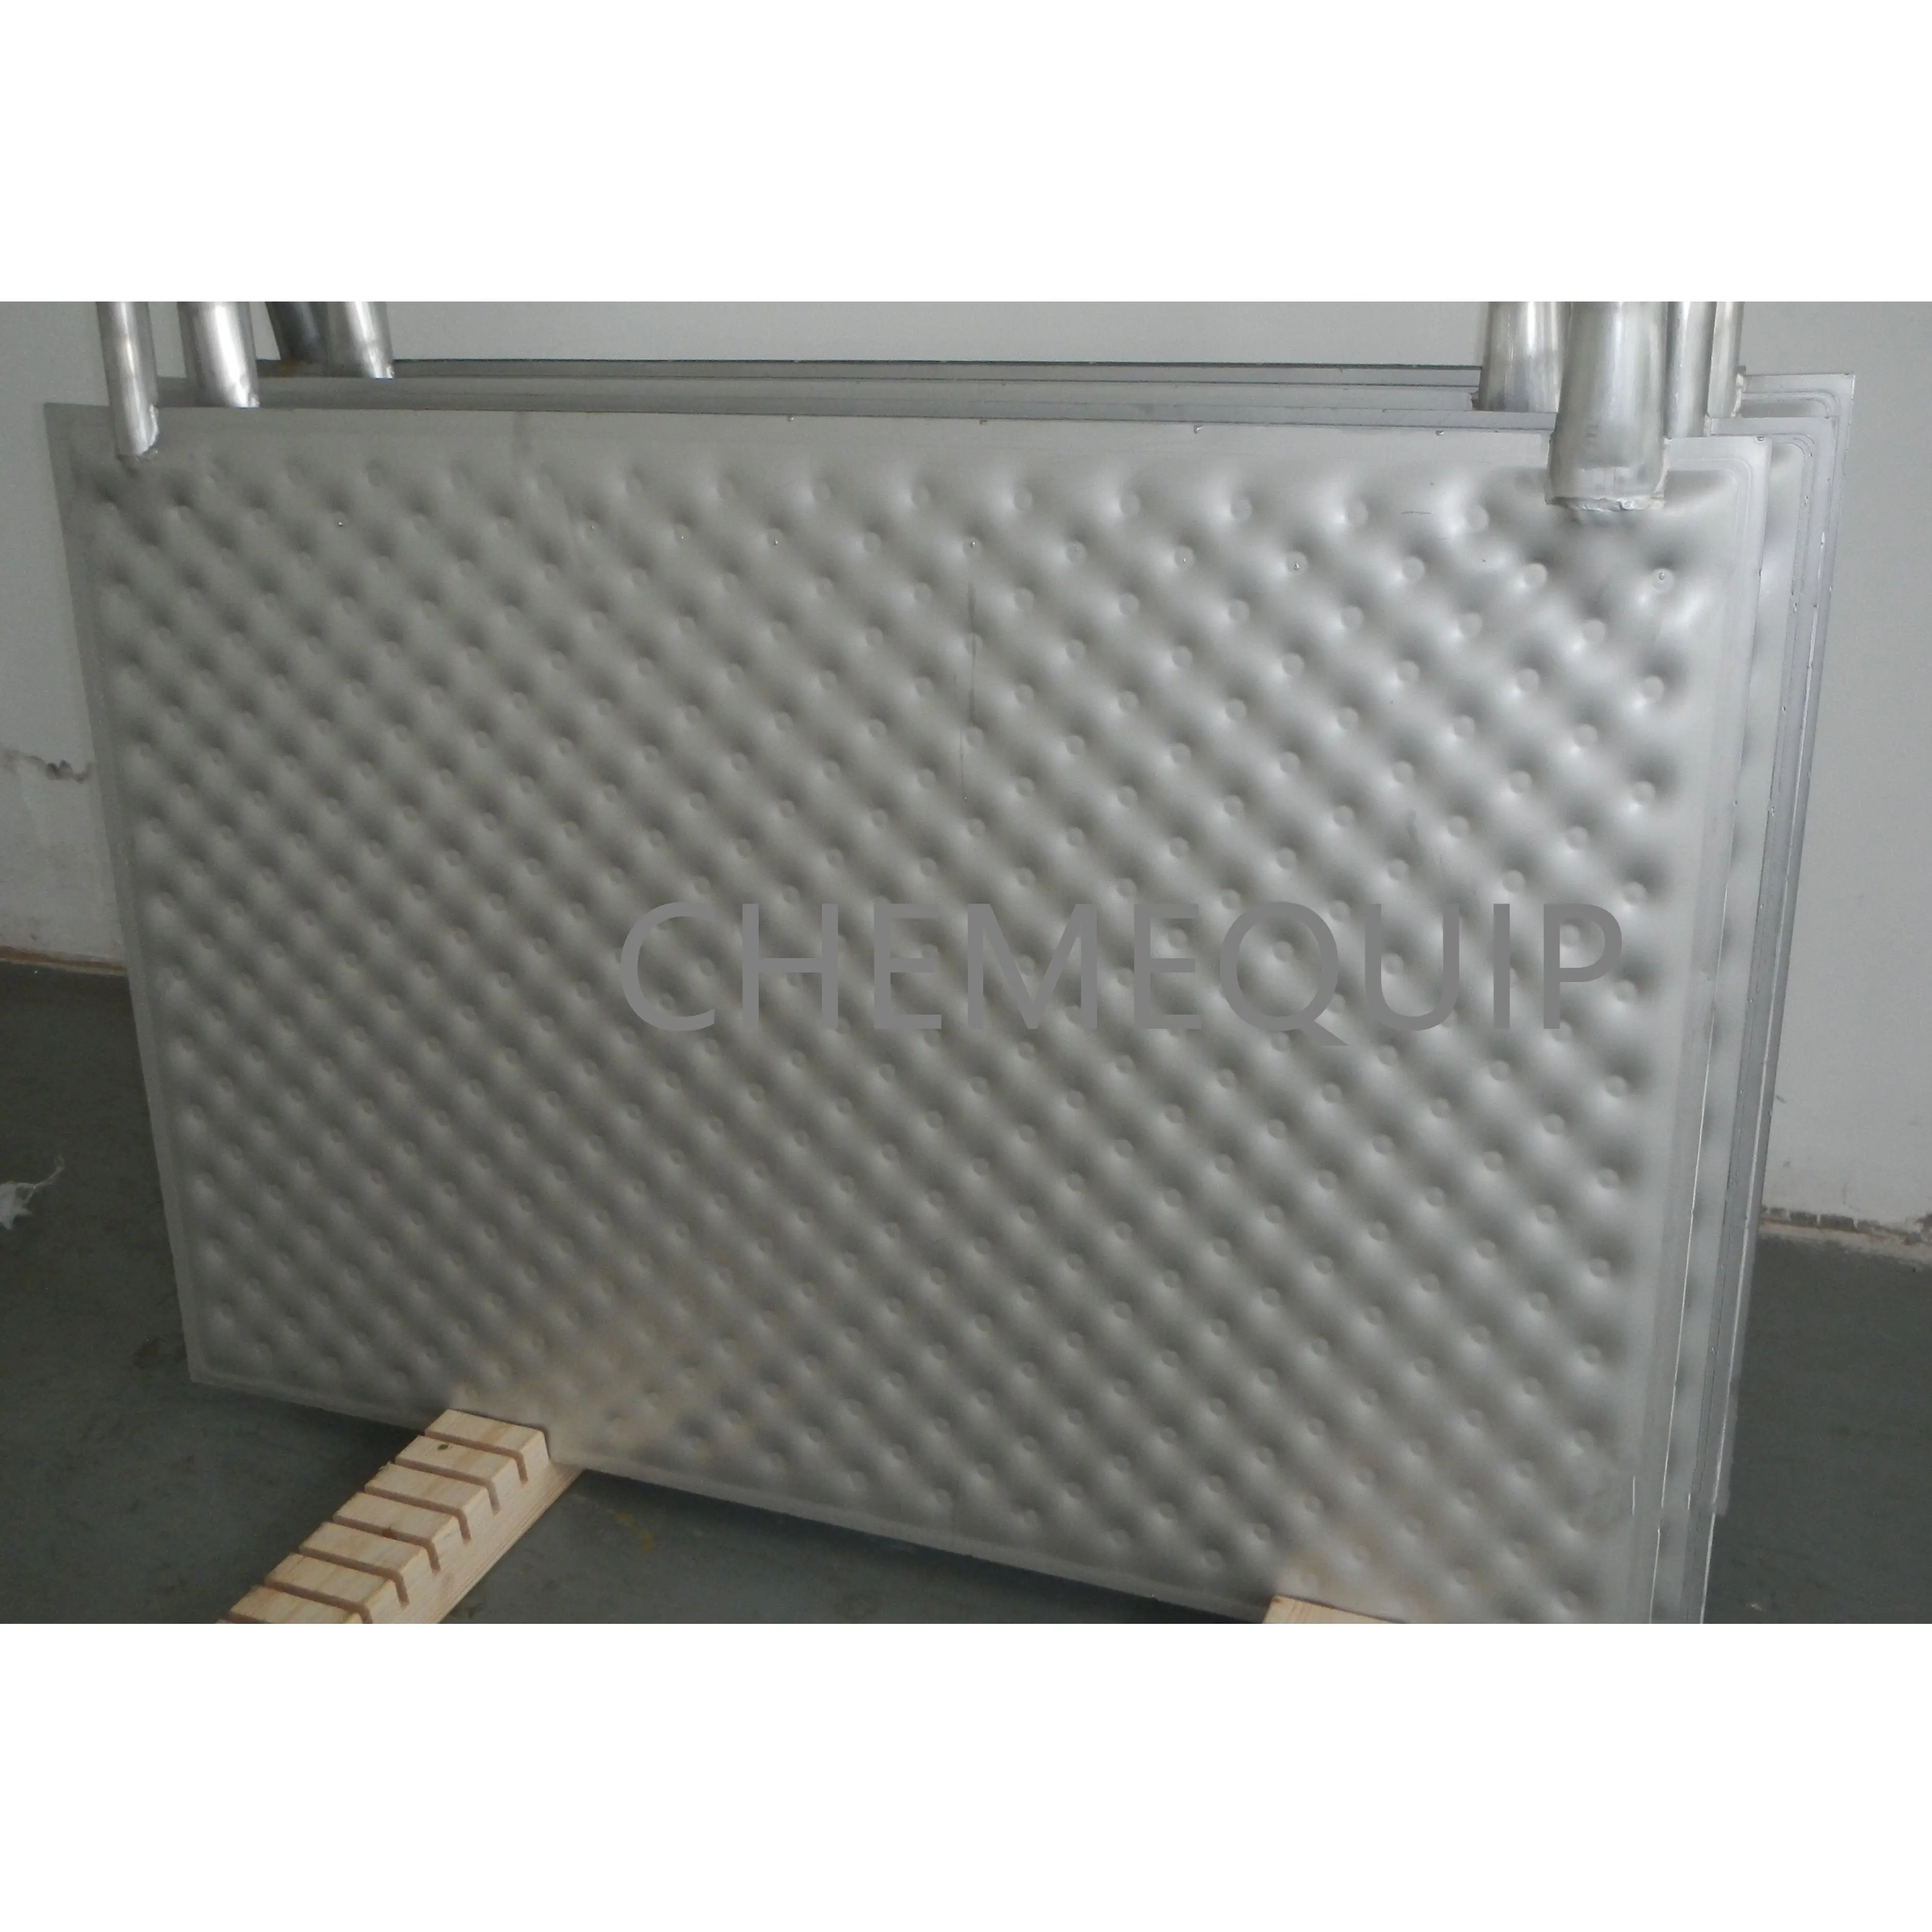 Freon r22 dimpled heat exchanger stainless steel evaporator plate